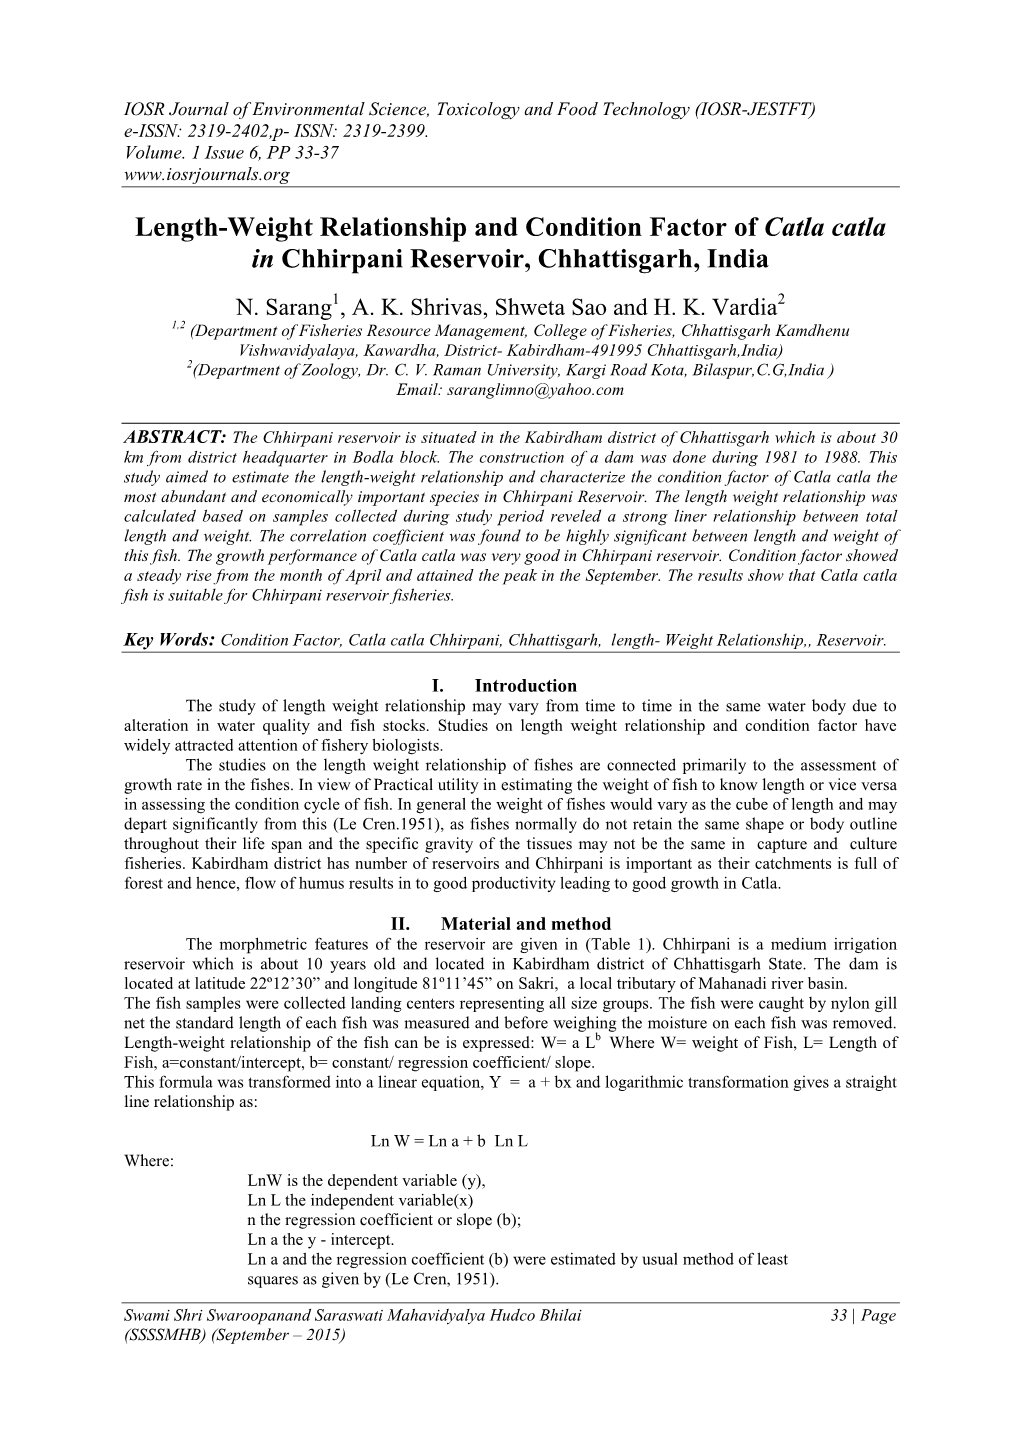 Length-Weight Relationship and Condition Factor of Catla Catla in Chhirpani Reservoir, Chhattisgarh, India